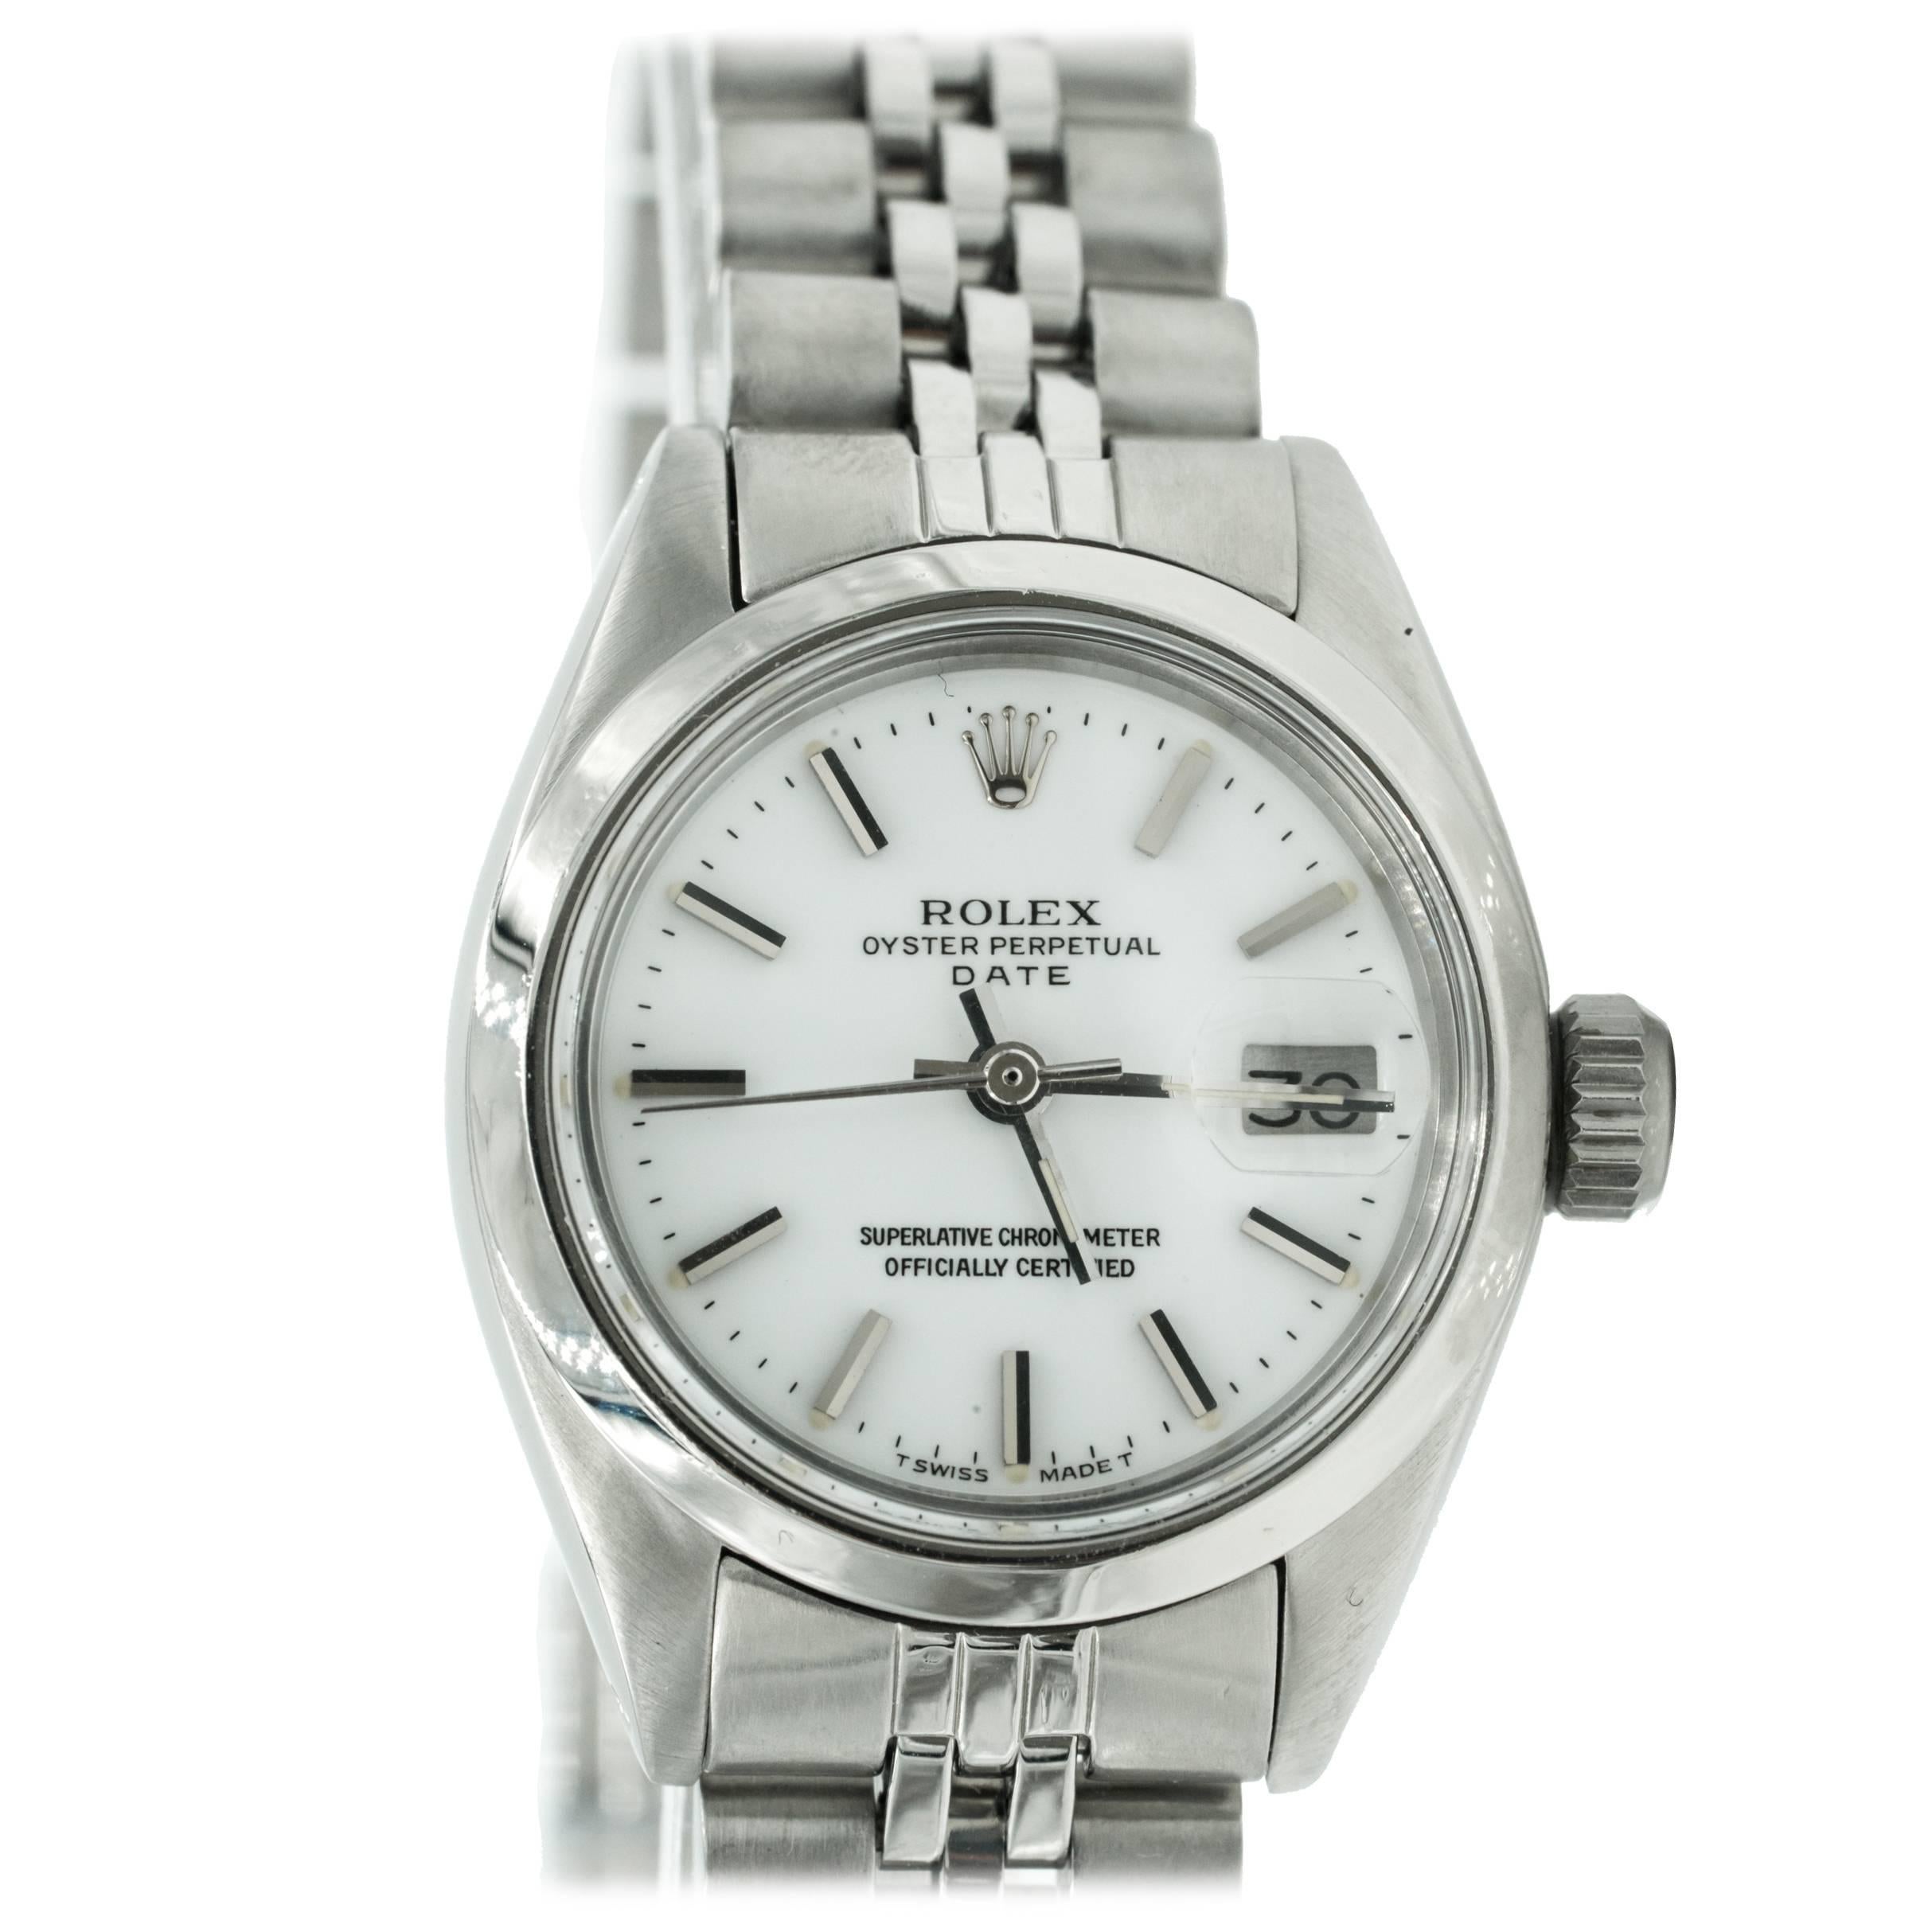 1977 Vintage Ladies Rolex Date Oyster Perpetual Stainless Steel White Dial